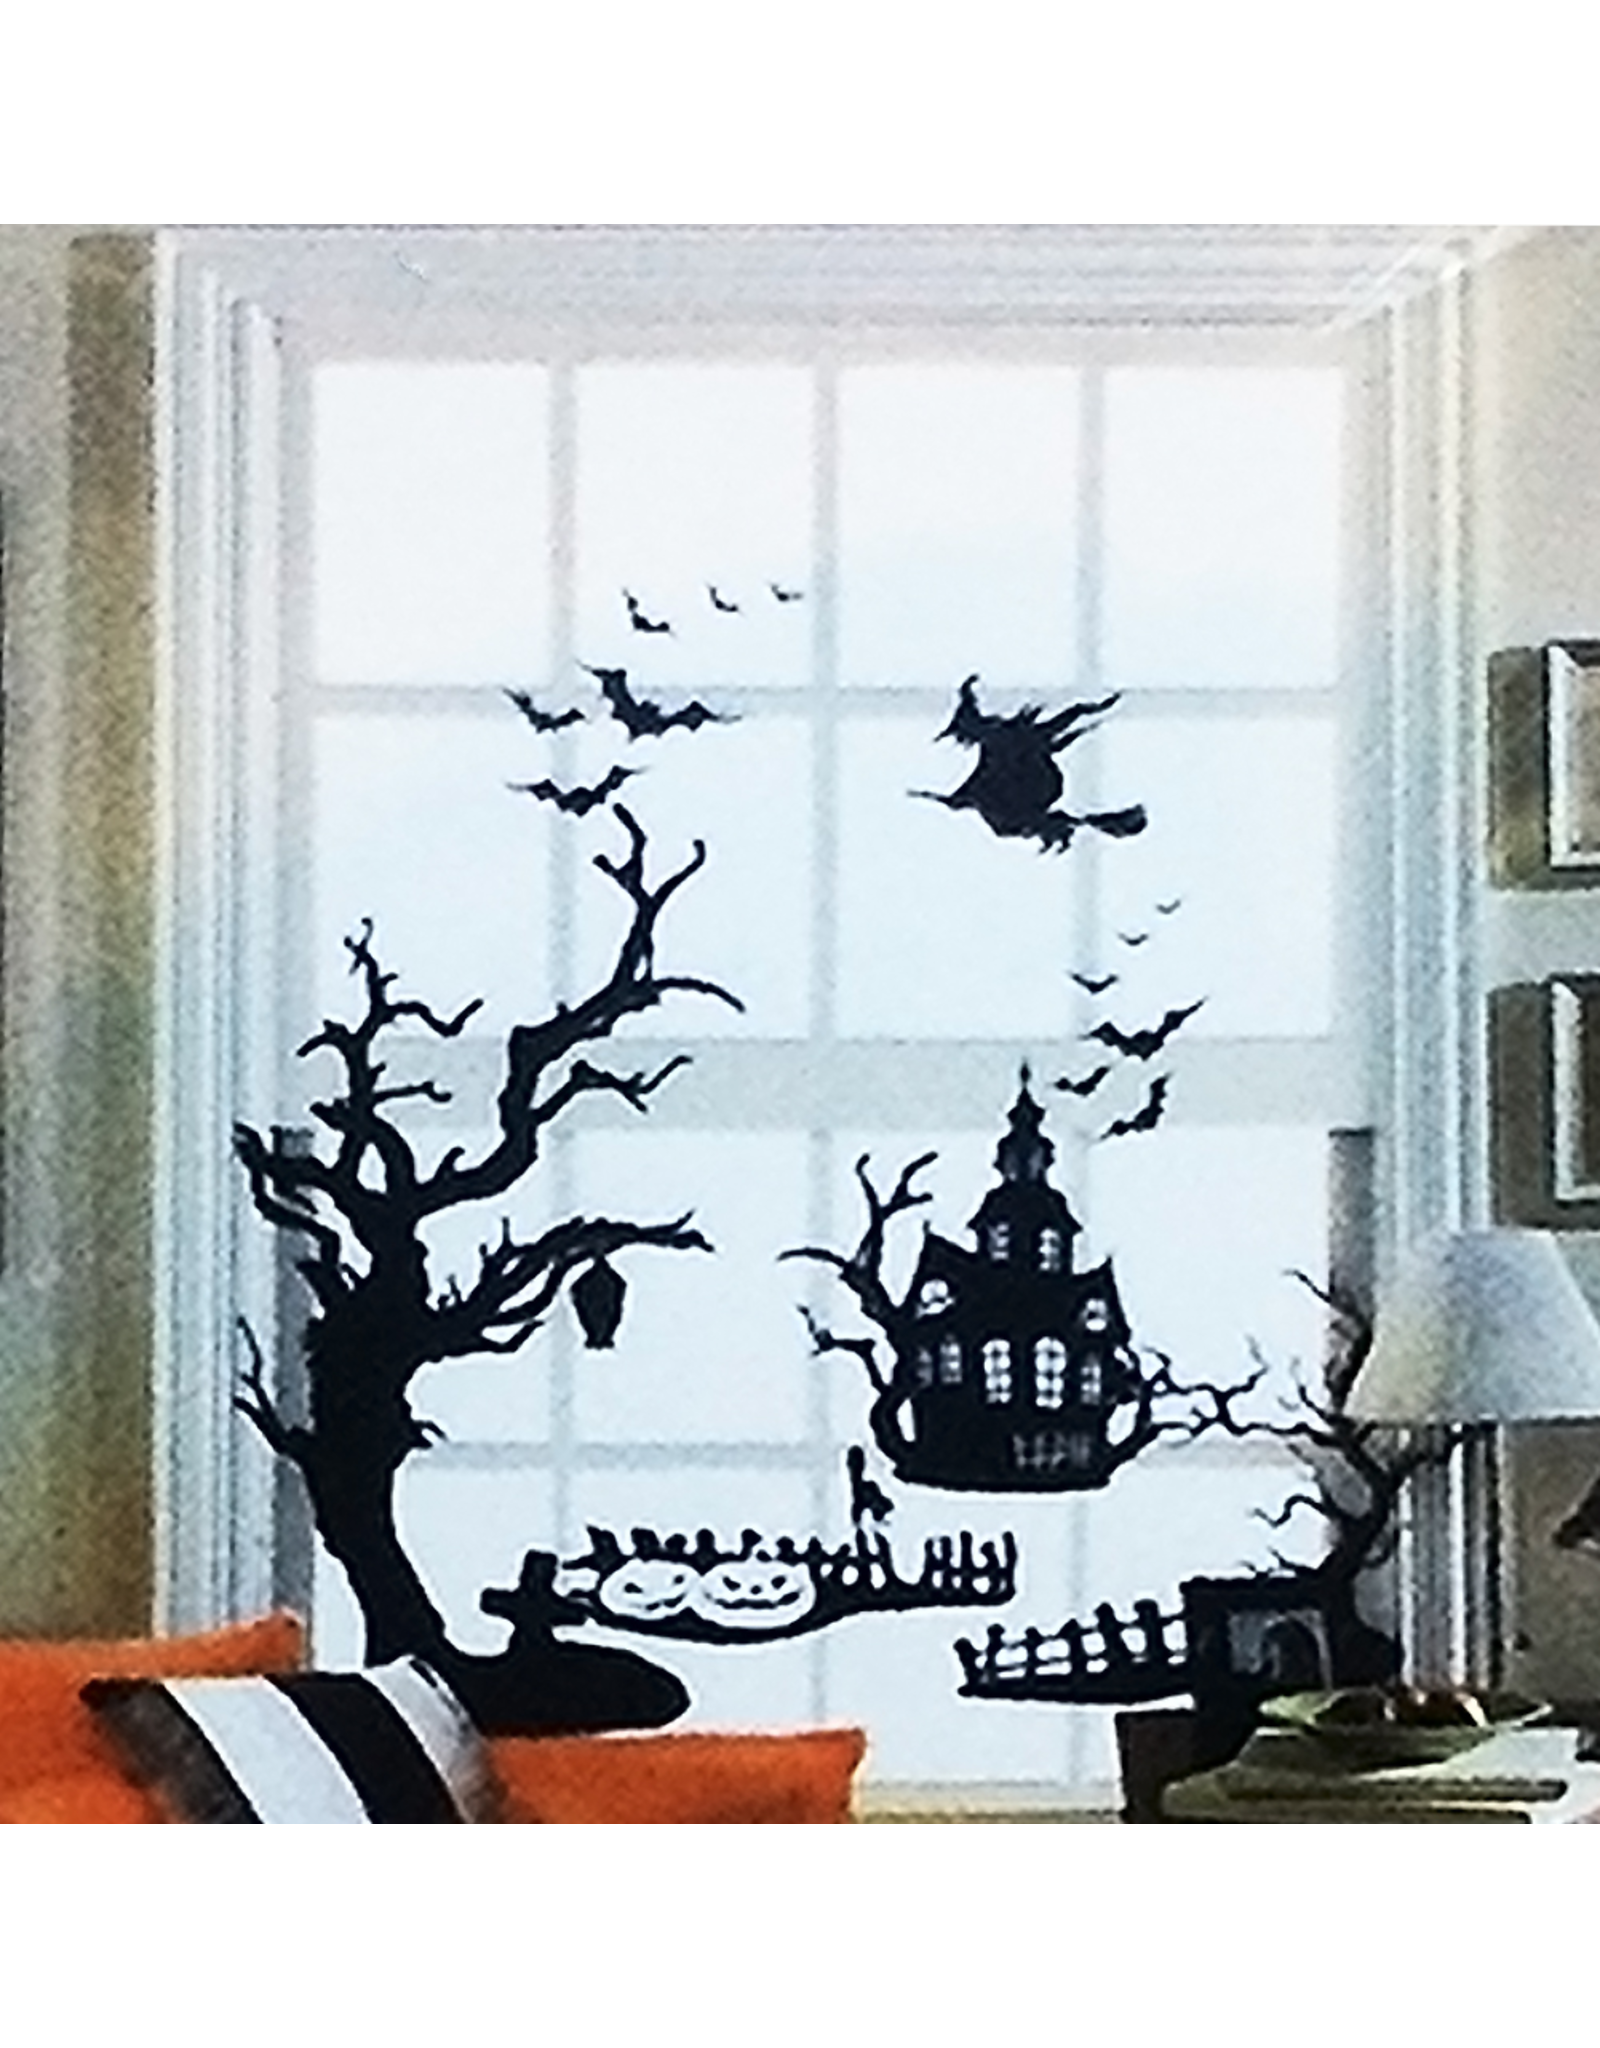 Darice Halloween Removable Wall Art Decals 2 Sheets - Haunted House